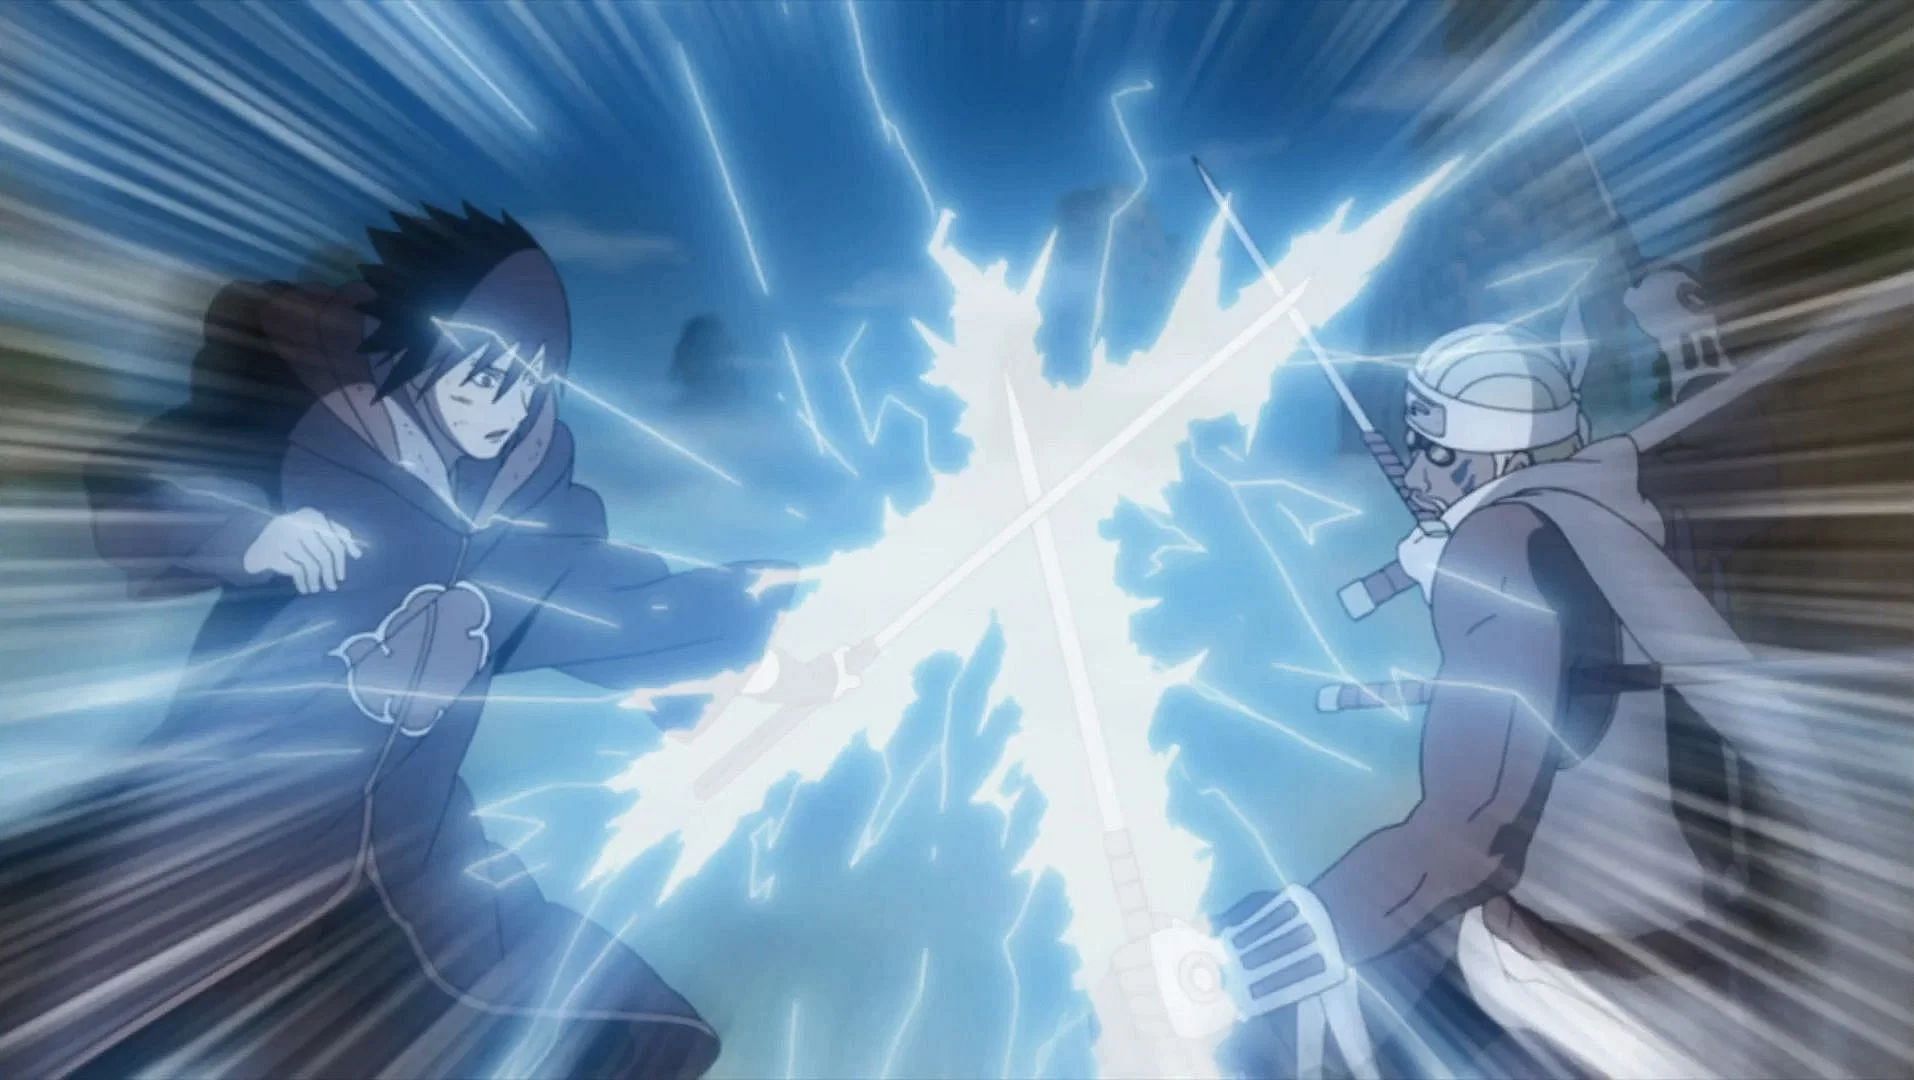 Sasuke vs Killer B is one of the most overrated Naruto fights (image via Pierrot)